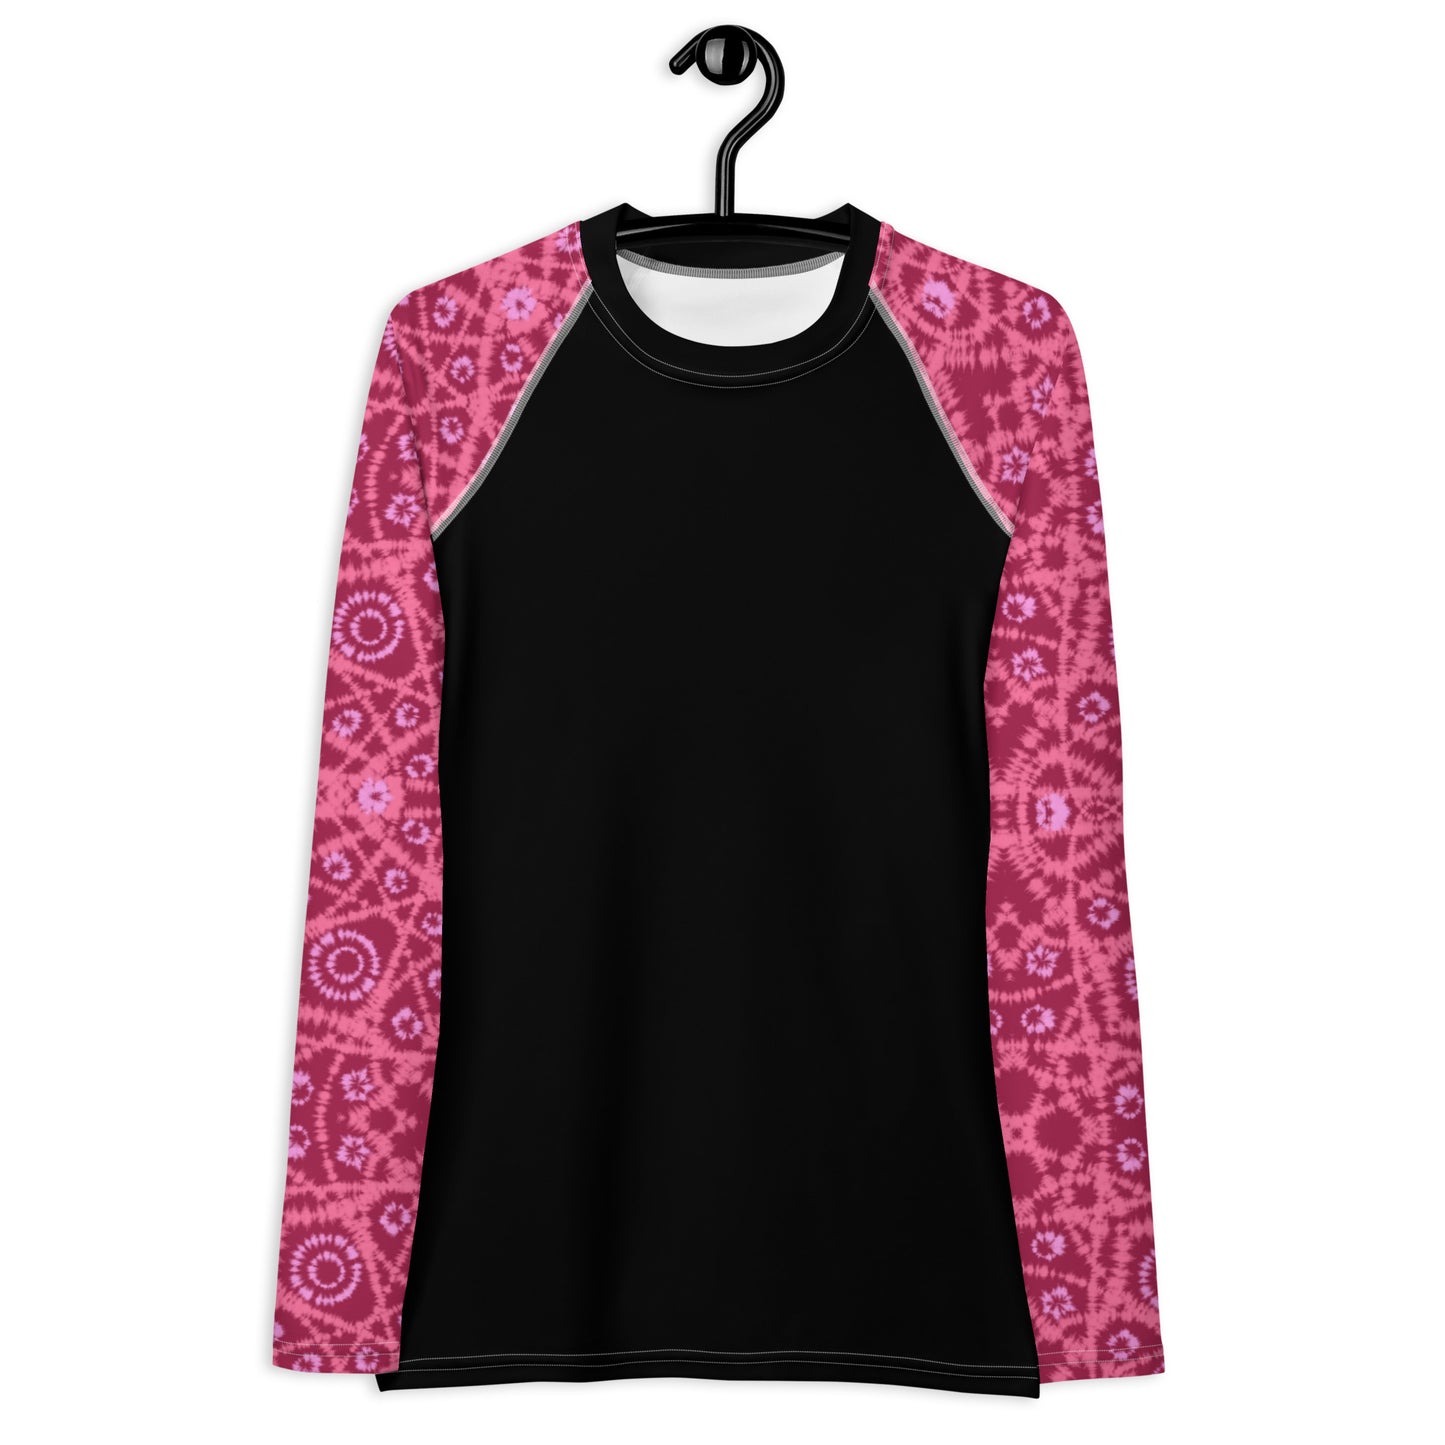 Batik - Red and Pink Sleeves and Black Body - Women's Rash Guard